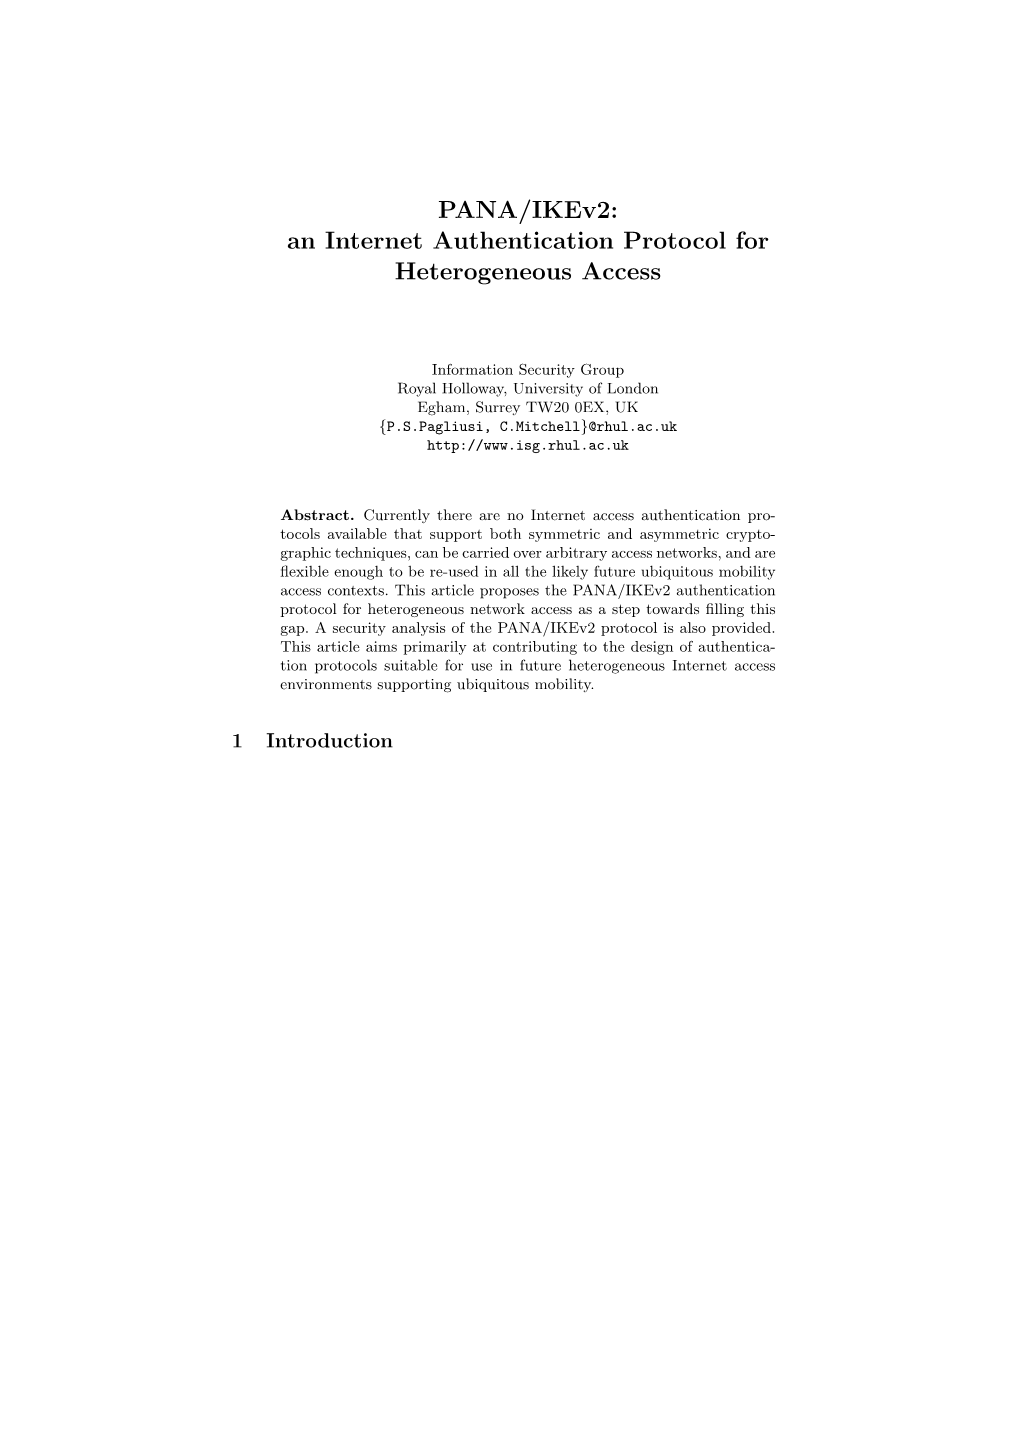 PANA/Ikev2: an Internet Authentication Protocol for Heterogeneous Access